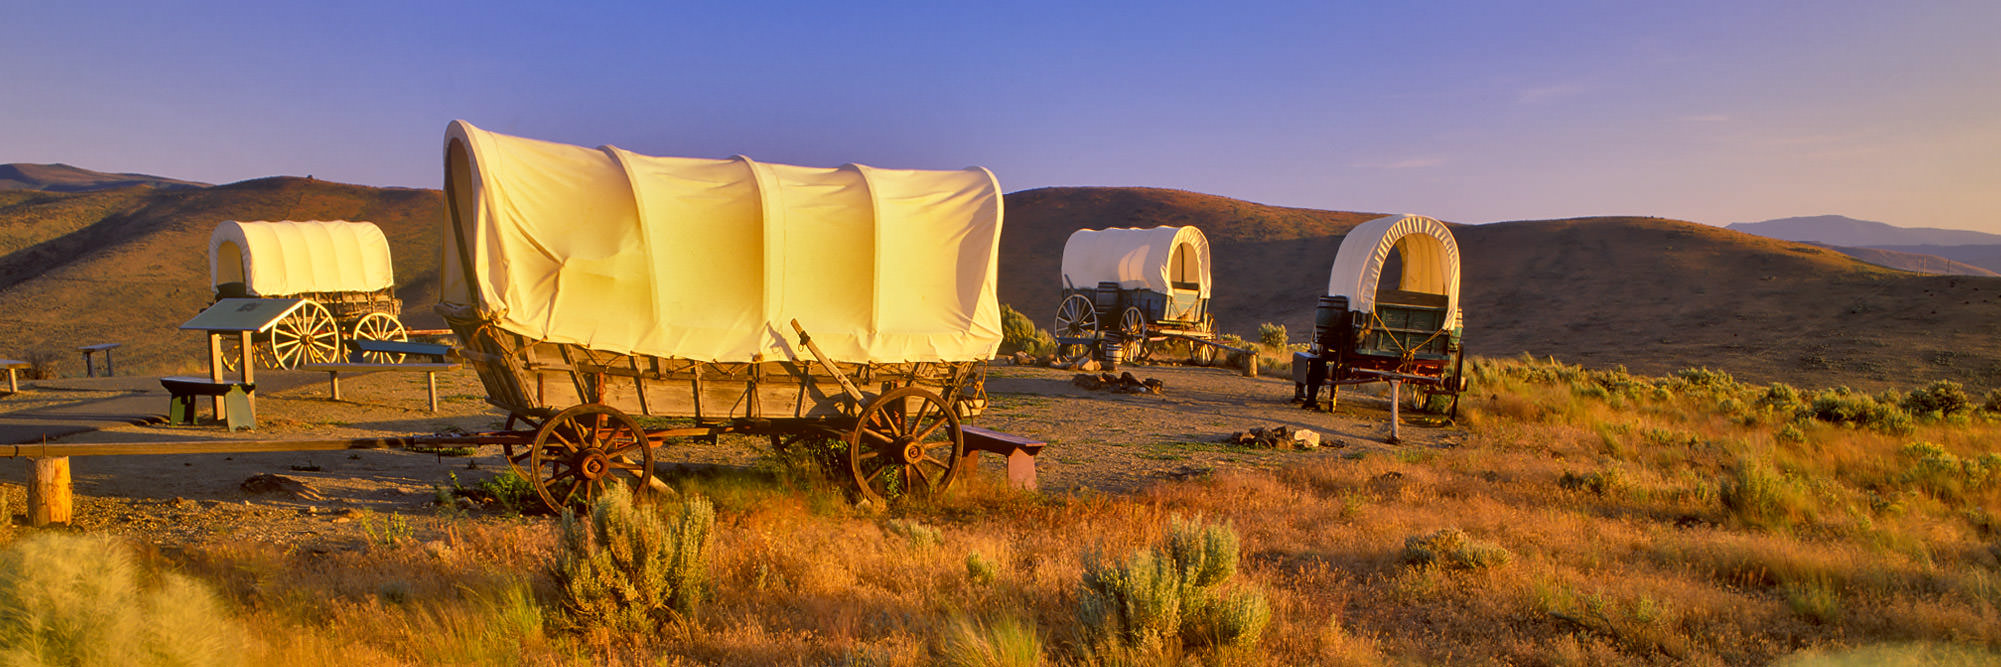 The Oregon Trail just turned 175, here are 7 ways to celebrate